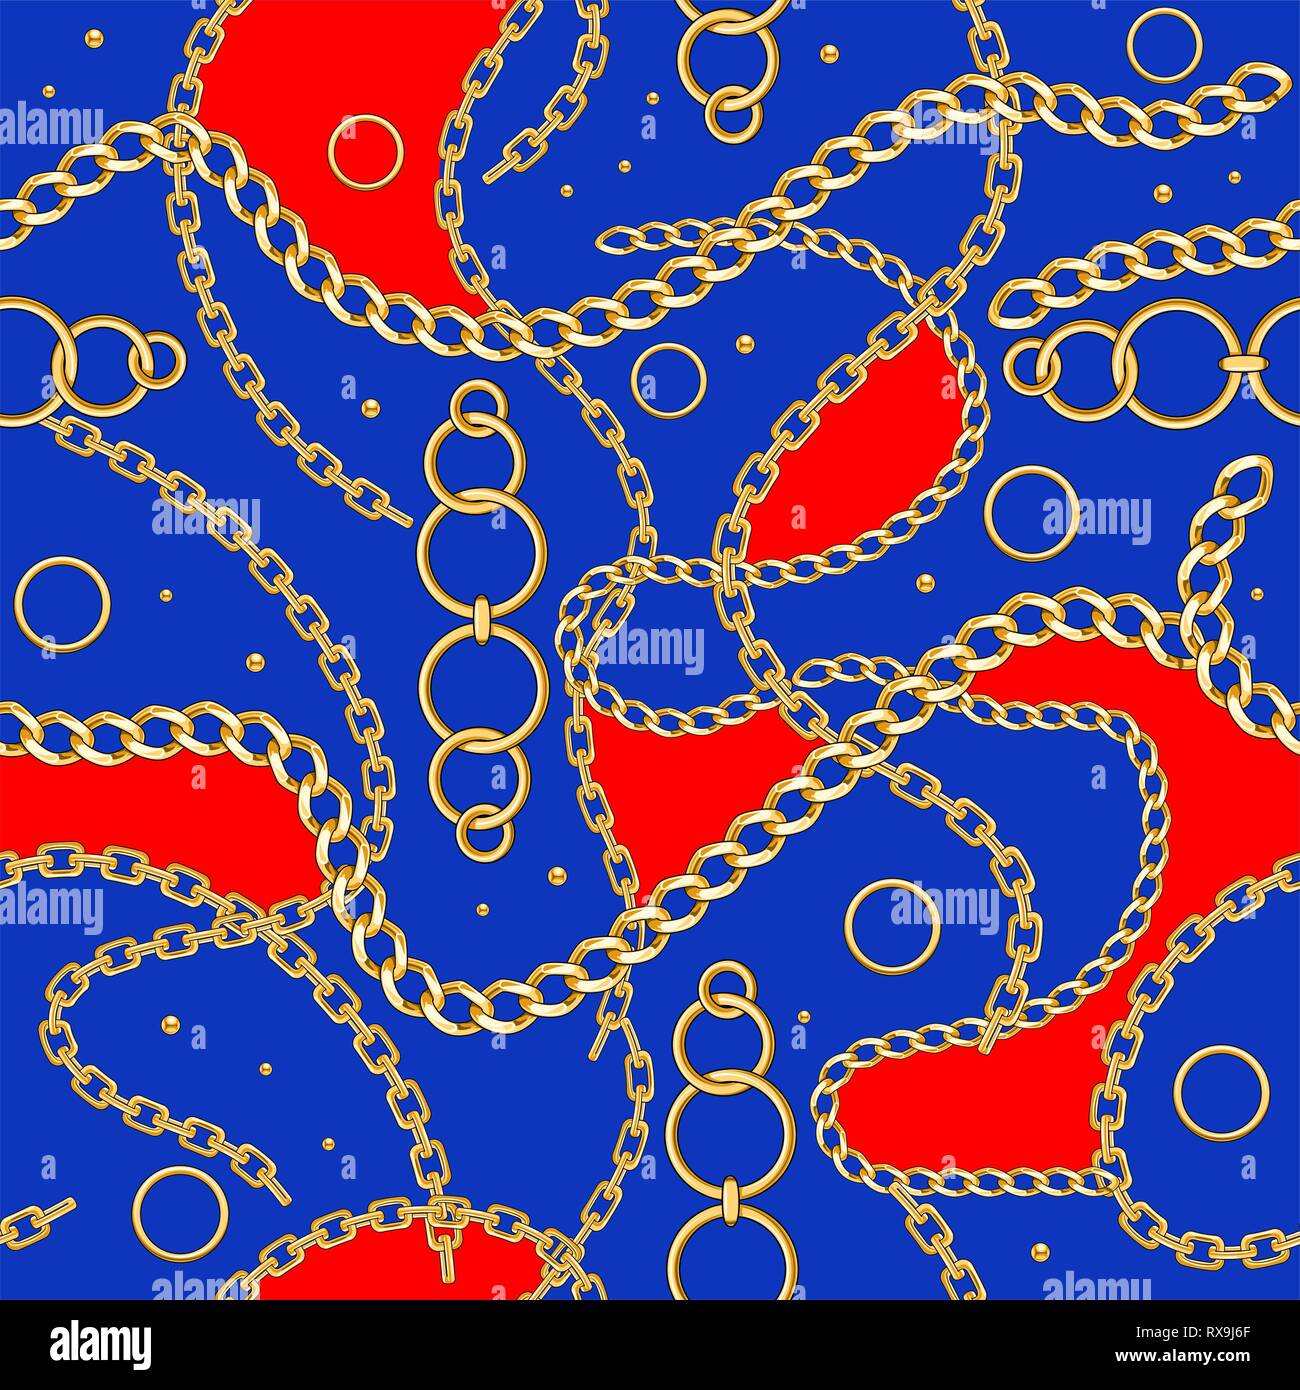 Abctract seamless pattern with belts, chain on bright background for fabric. Trendy repeating background. Stock Vector